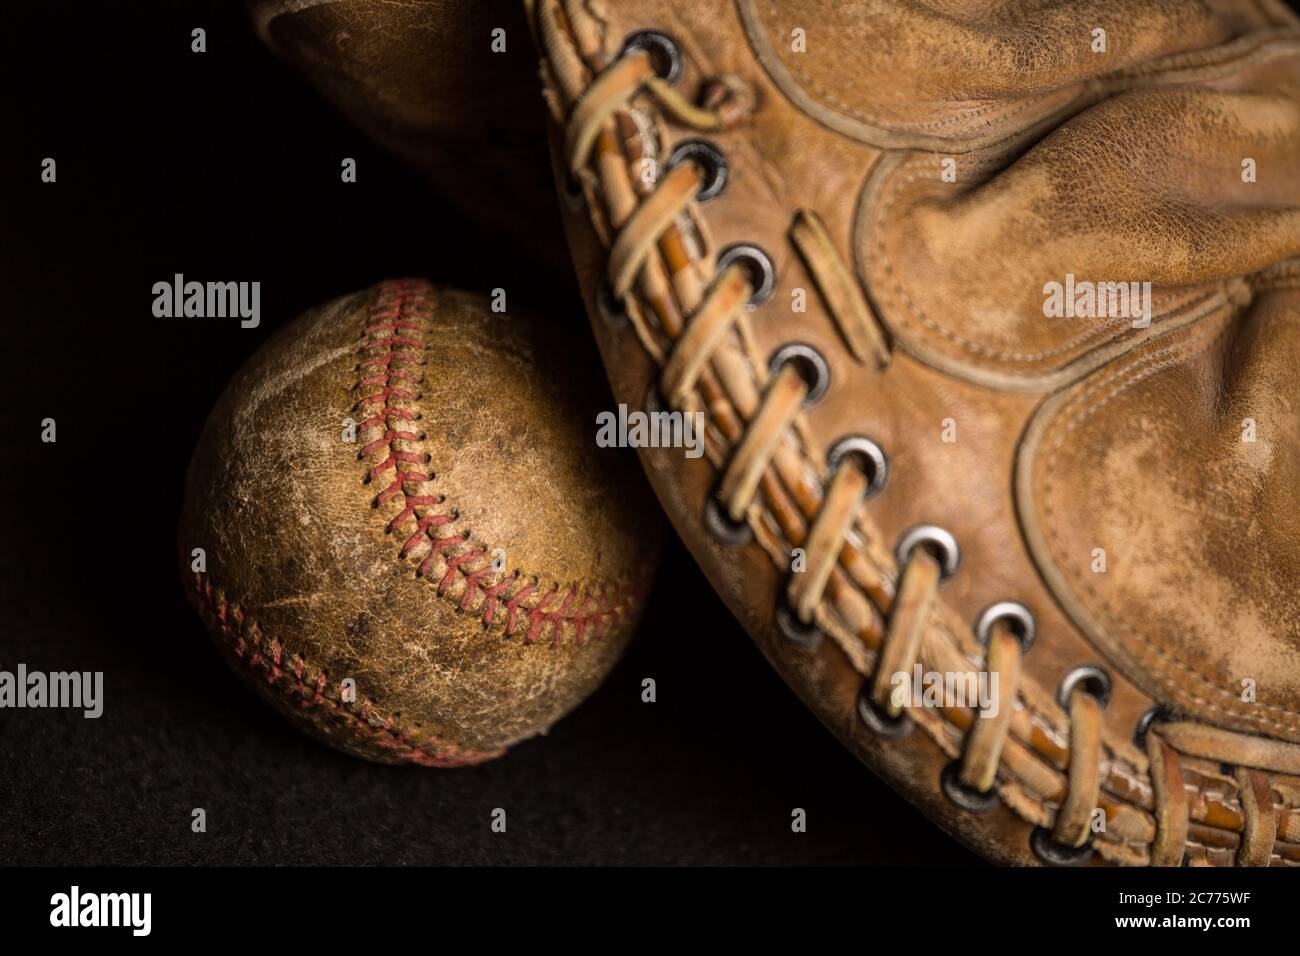 Old style baseball glove near stained and well used ball. Stock Photo